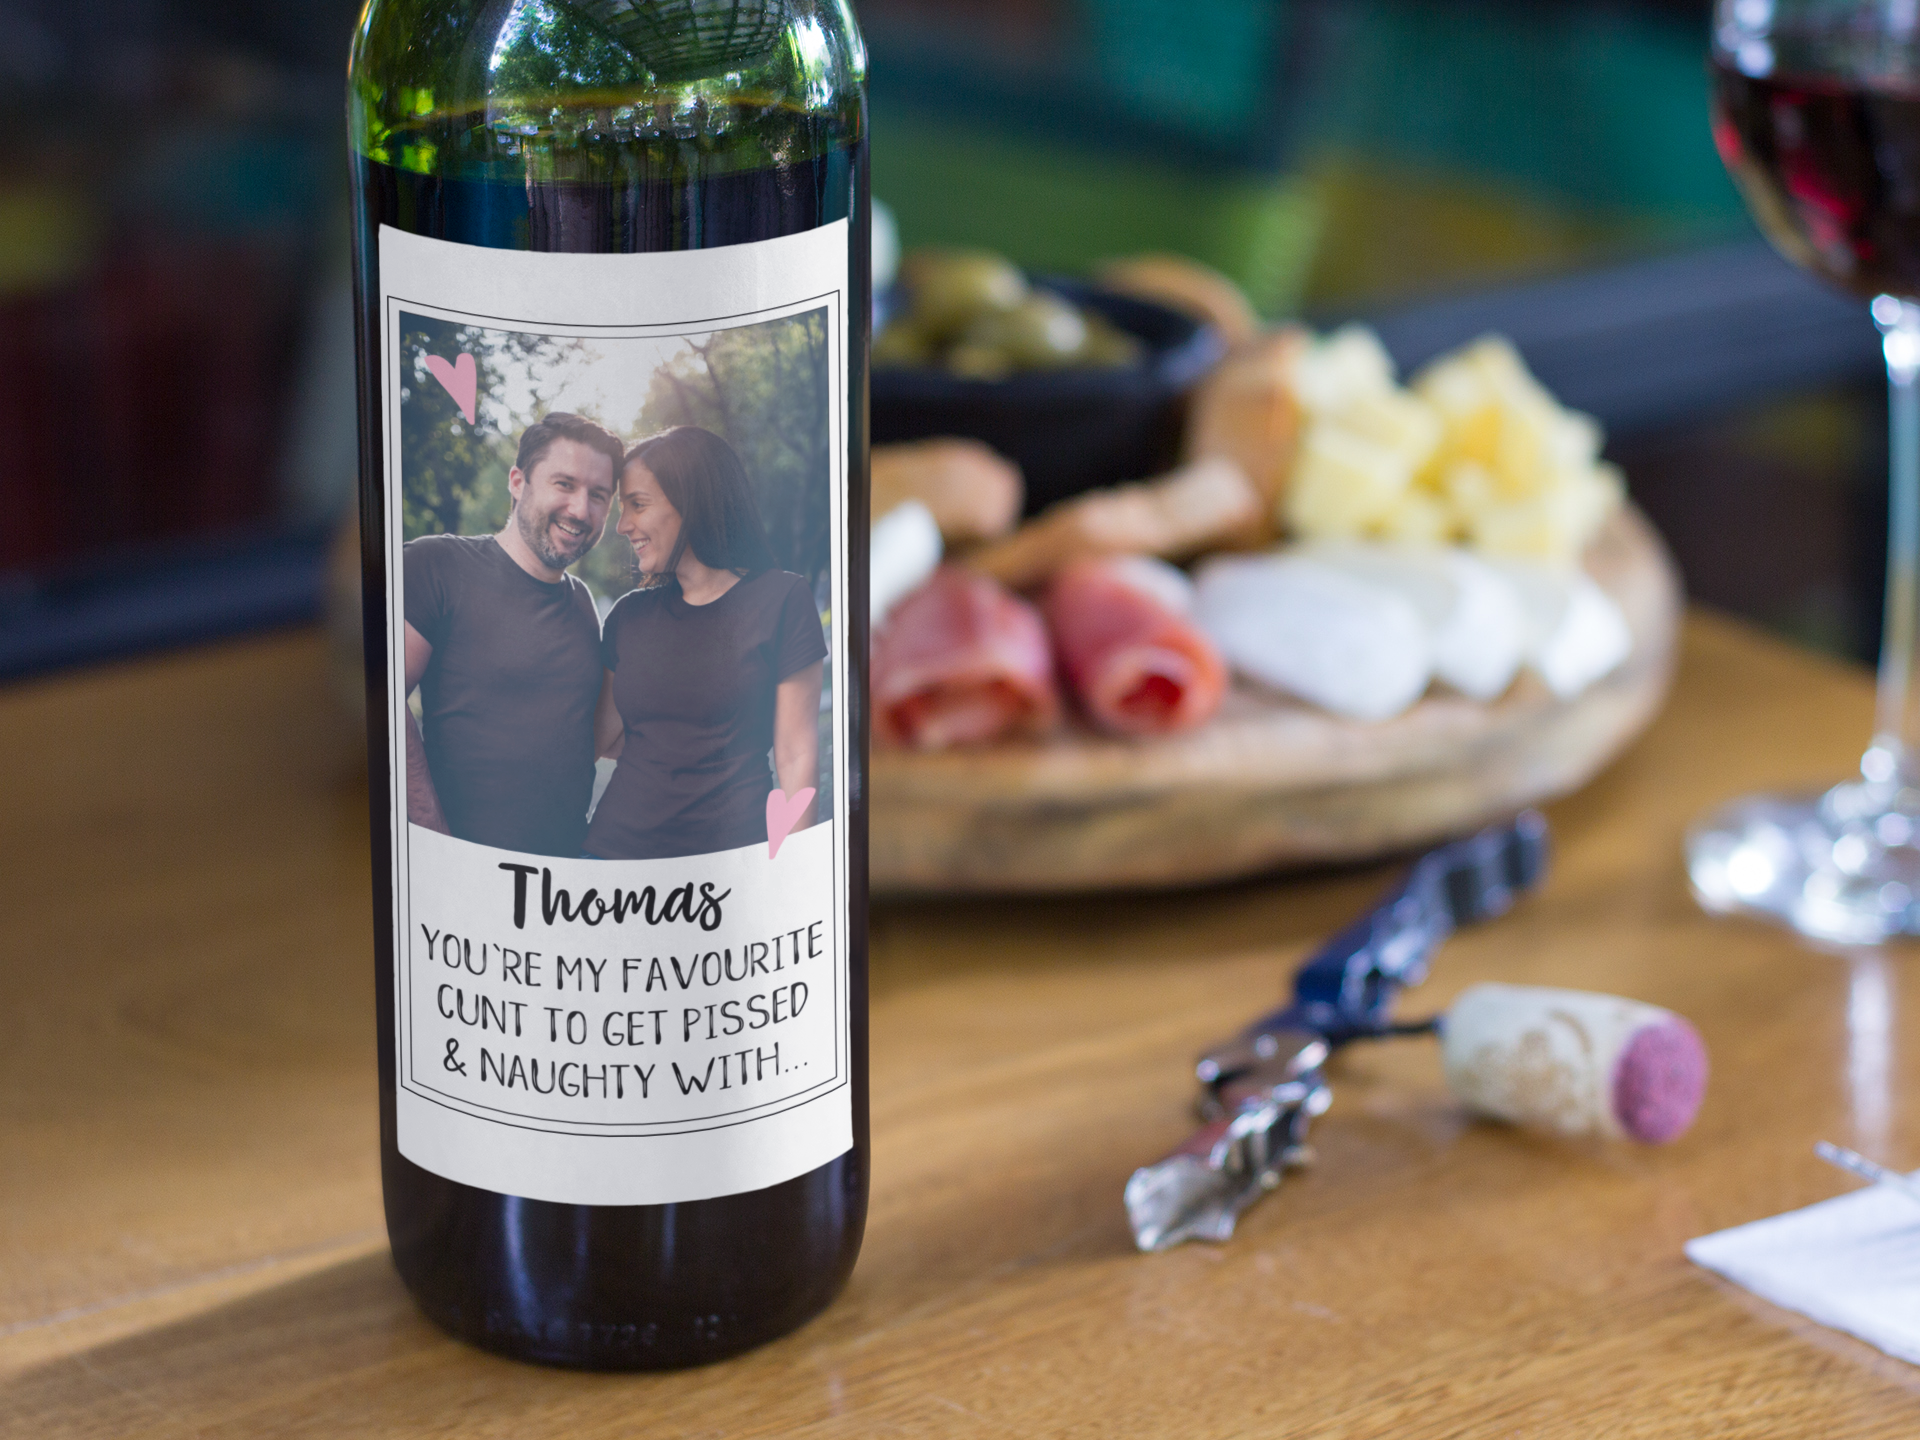 Wine bottle featuring a personalised label of a photo of couple & a funny quote underneath which reads '(name), you're my favourite cunt to get pissed & naughty with'.